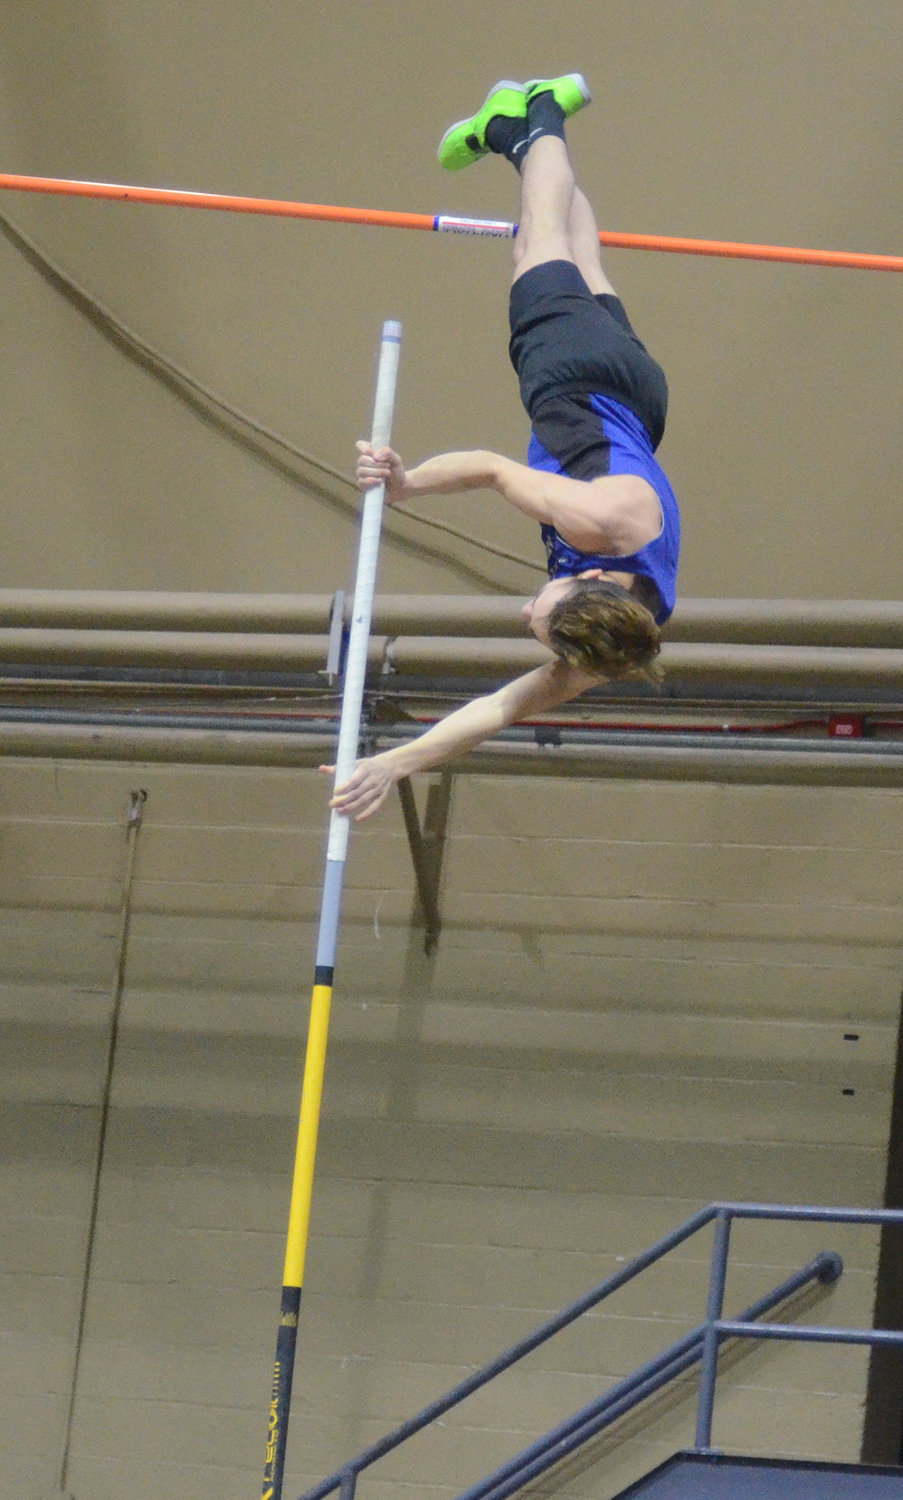 Wallkill’s Louis Martinez competes in the pole vault at the NYS Qualifers on Feb. 28, 2020, at the Gillis Field House at the U.S. Military Academy at West Point.